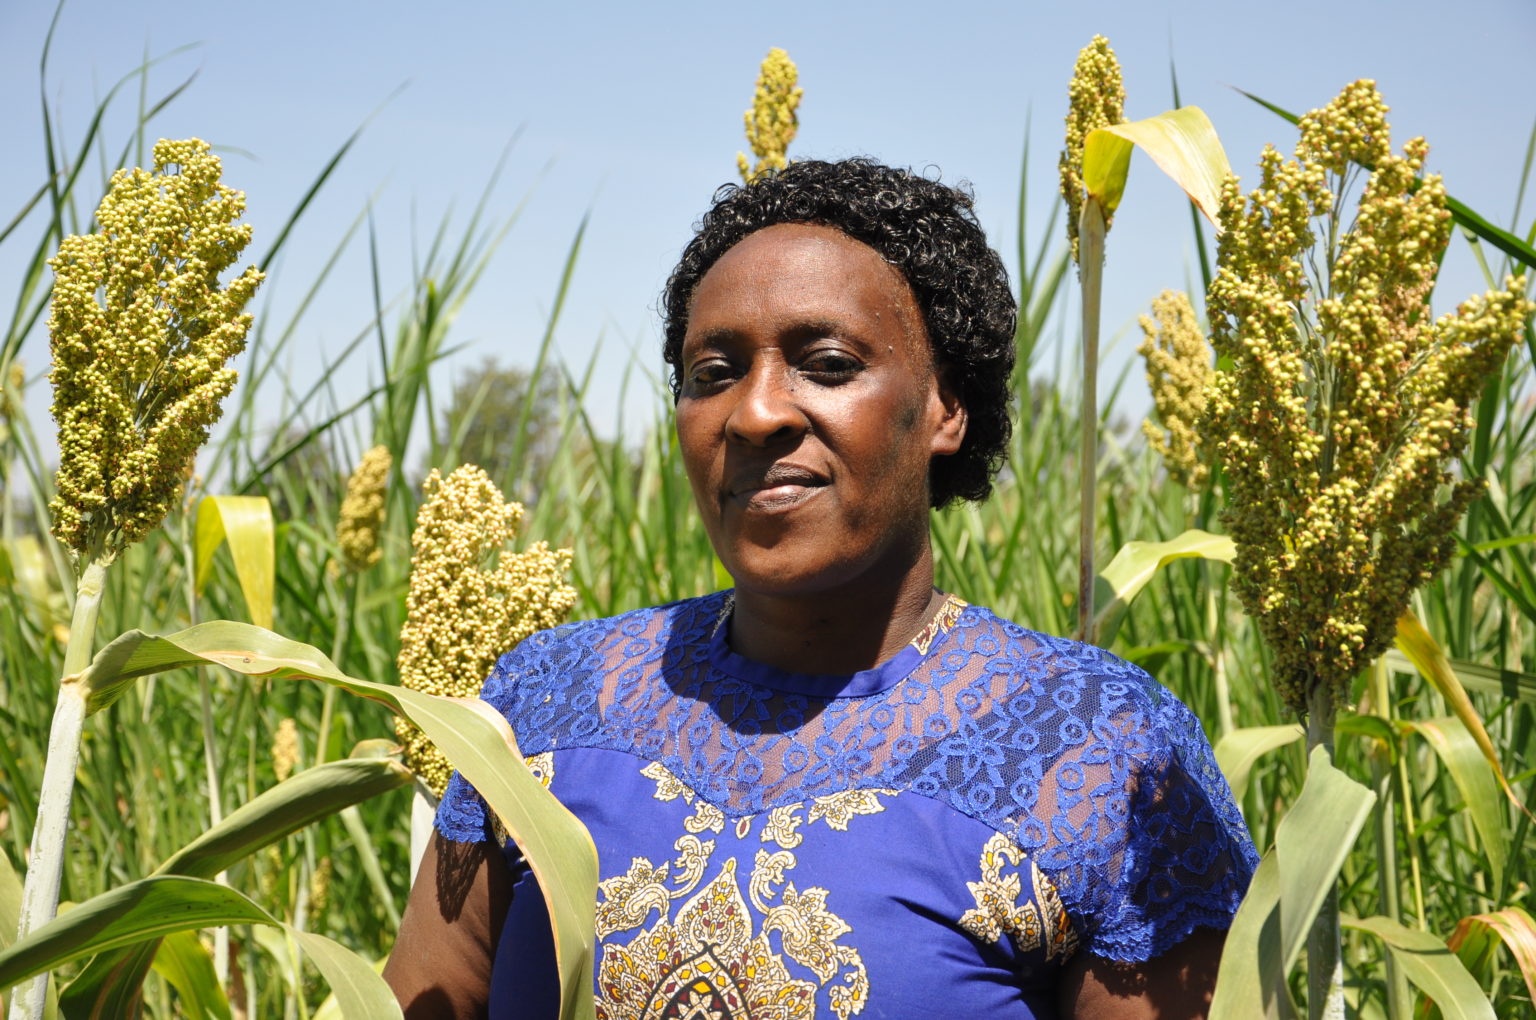 Susan is a sorghum farmer and buying agent for Shalem. This picture was taken by Kristin Williams, Communications Manager, during a visit to Shalem in July 2019.